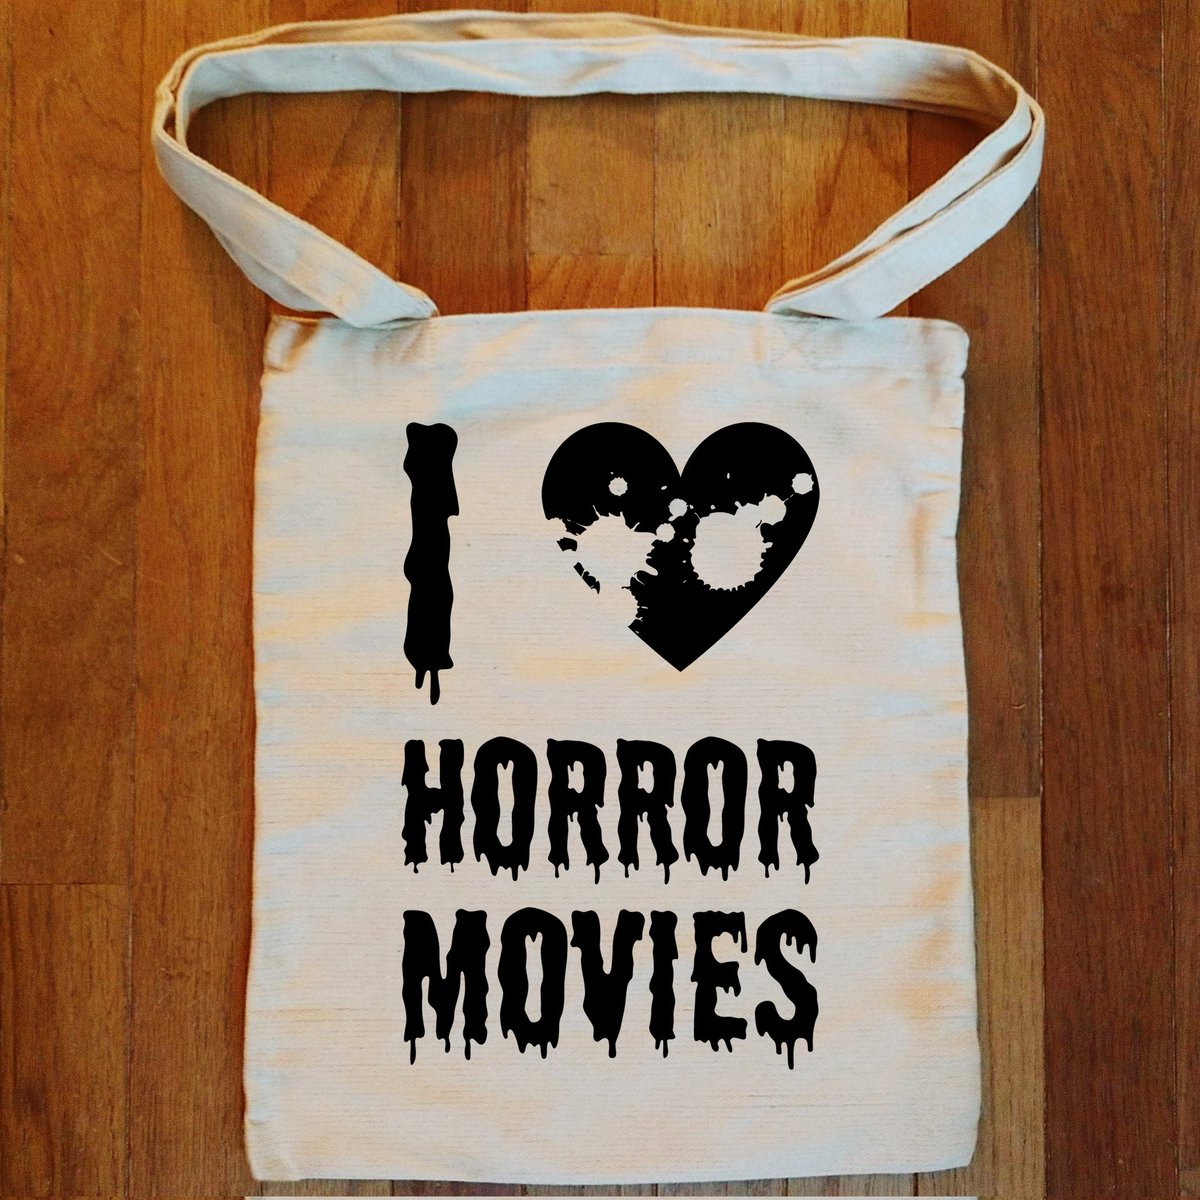 Check out my 'I ❤️ Horror Movies' Canvas Tote Bags, which are available in my #Etsy Shop!!! 🍿🎥🎞️📼🩸

etsy.com/listing/837806…
.
.
.
#etsyseller #etsyshop #etsyfinds #shopsmall #tote #totebag #canvastotebag #horror #horrormovie #horrormovies #horrorfan #horrorlover